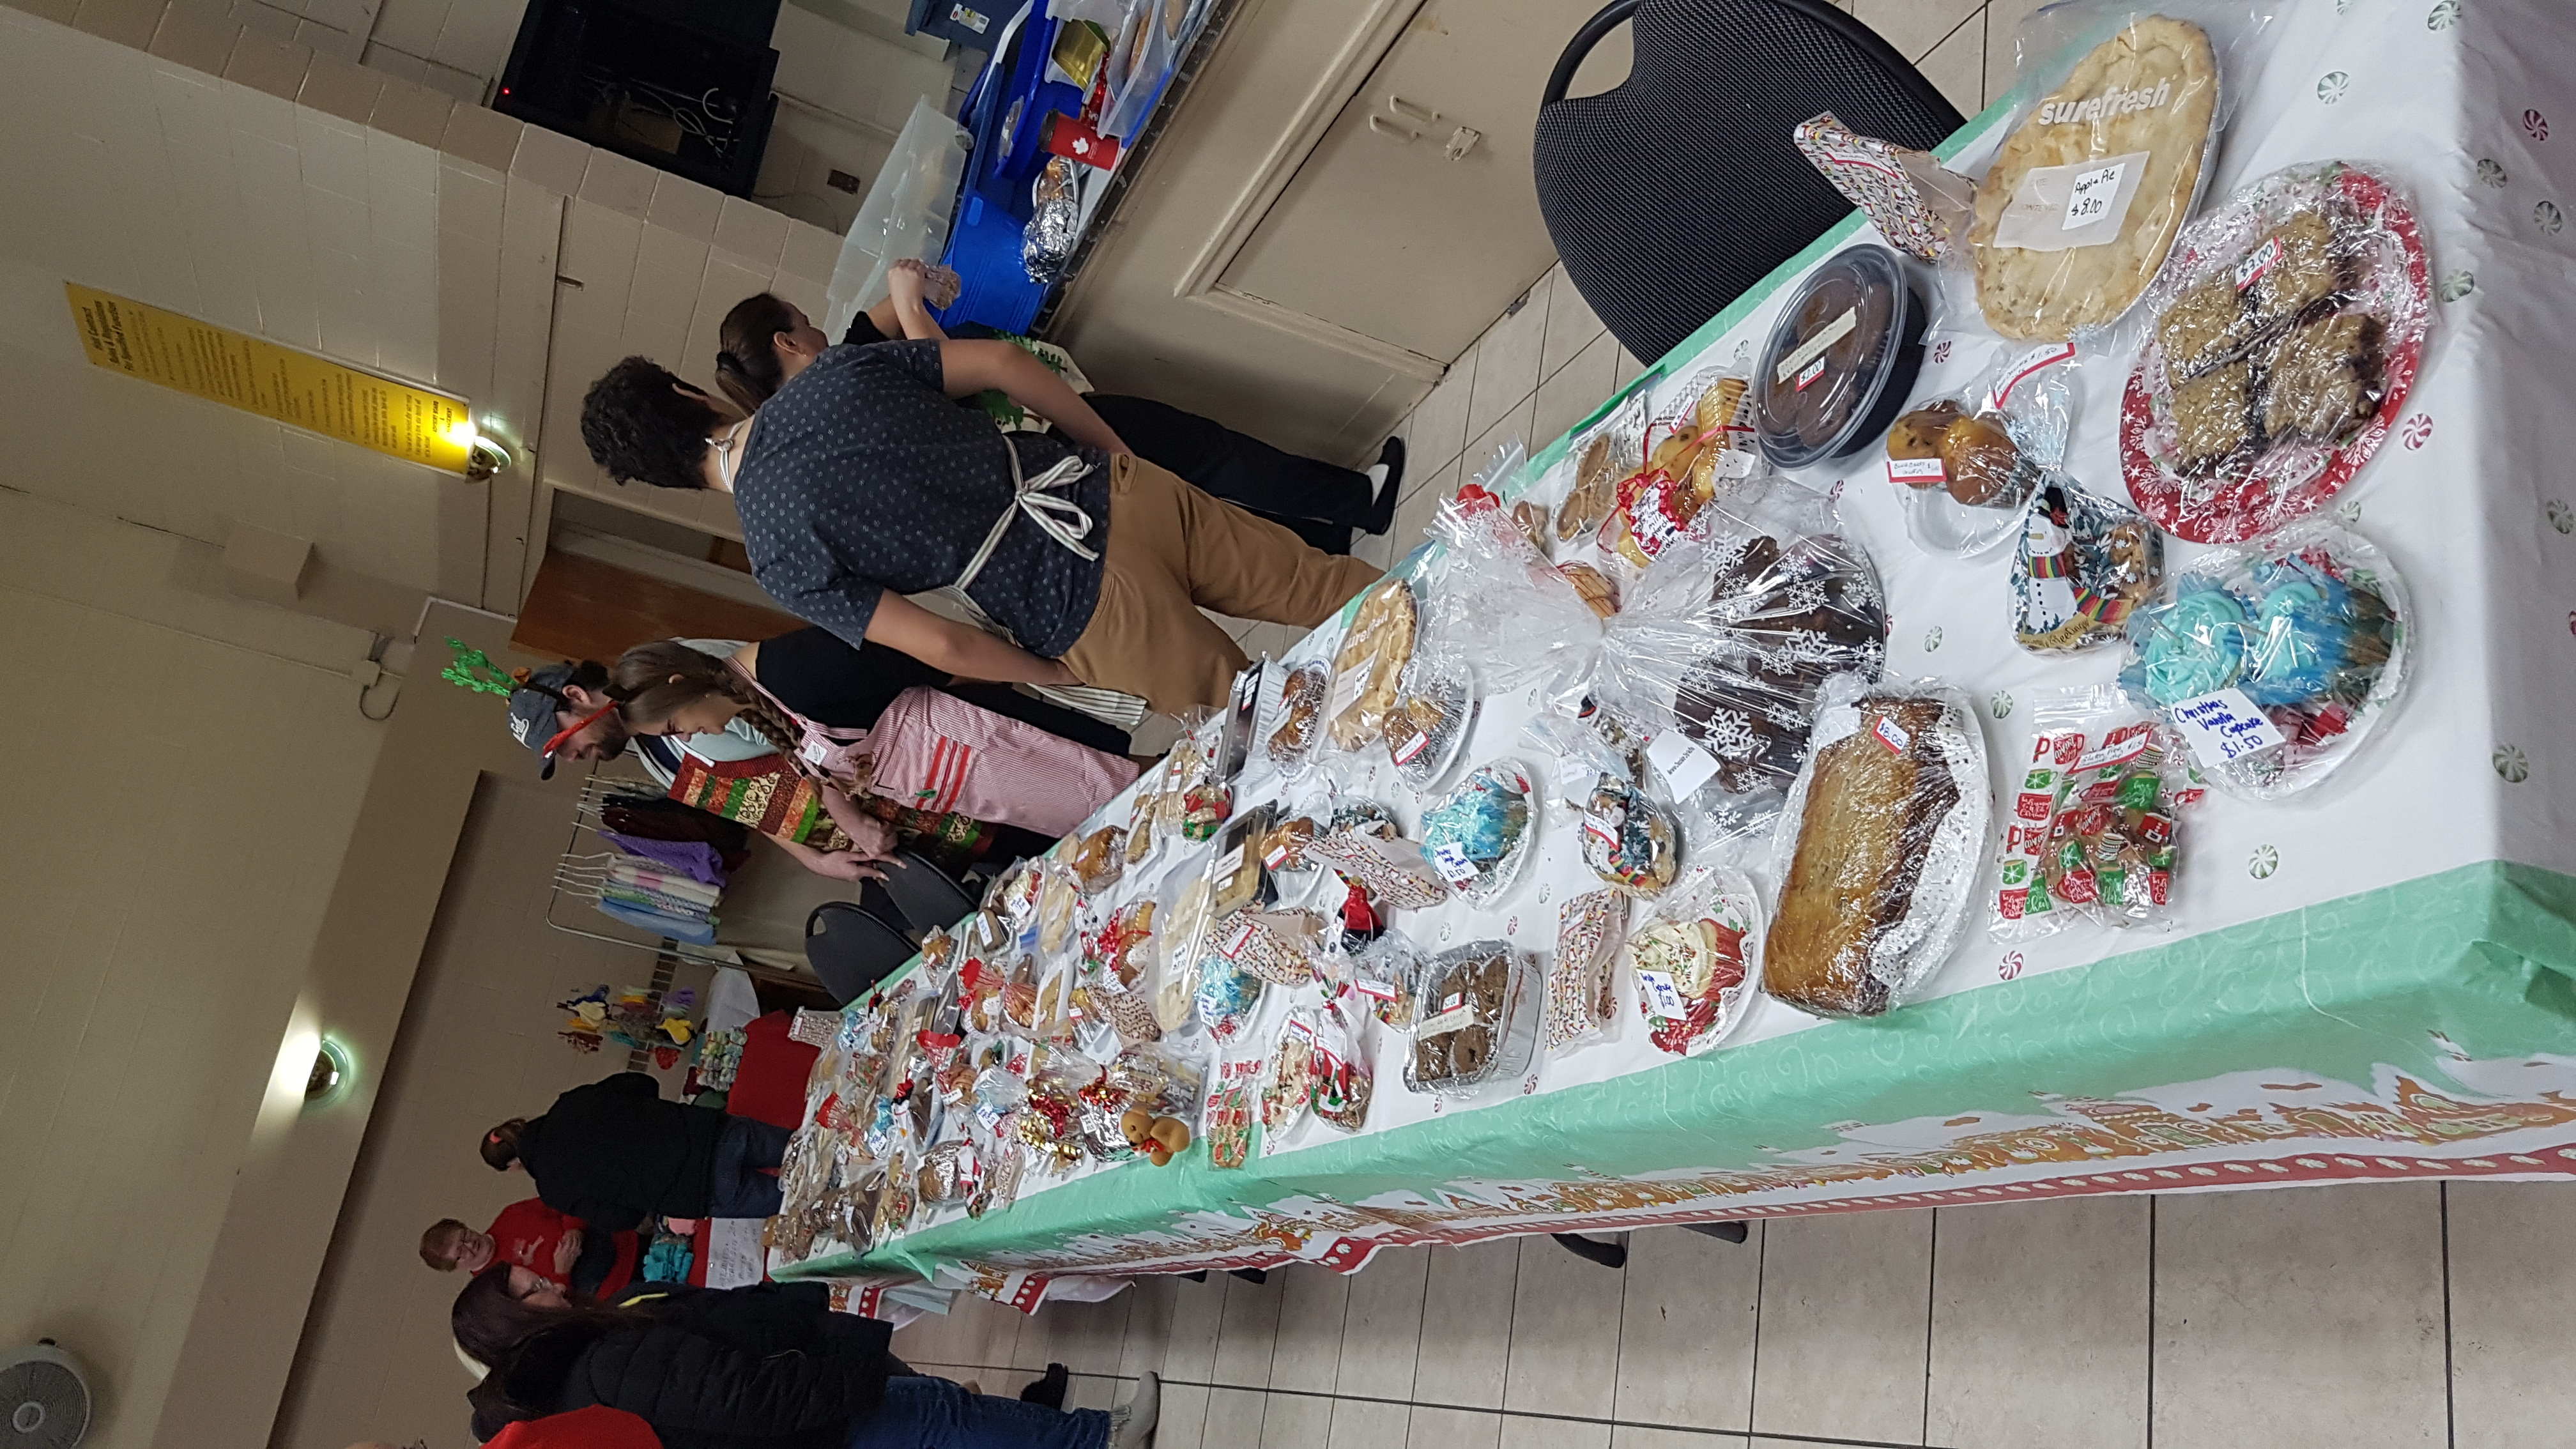 picture of the baked goods for sale